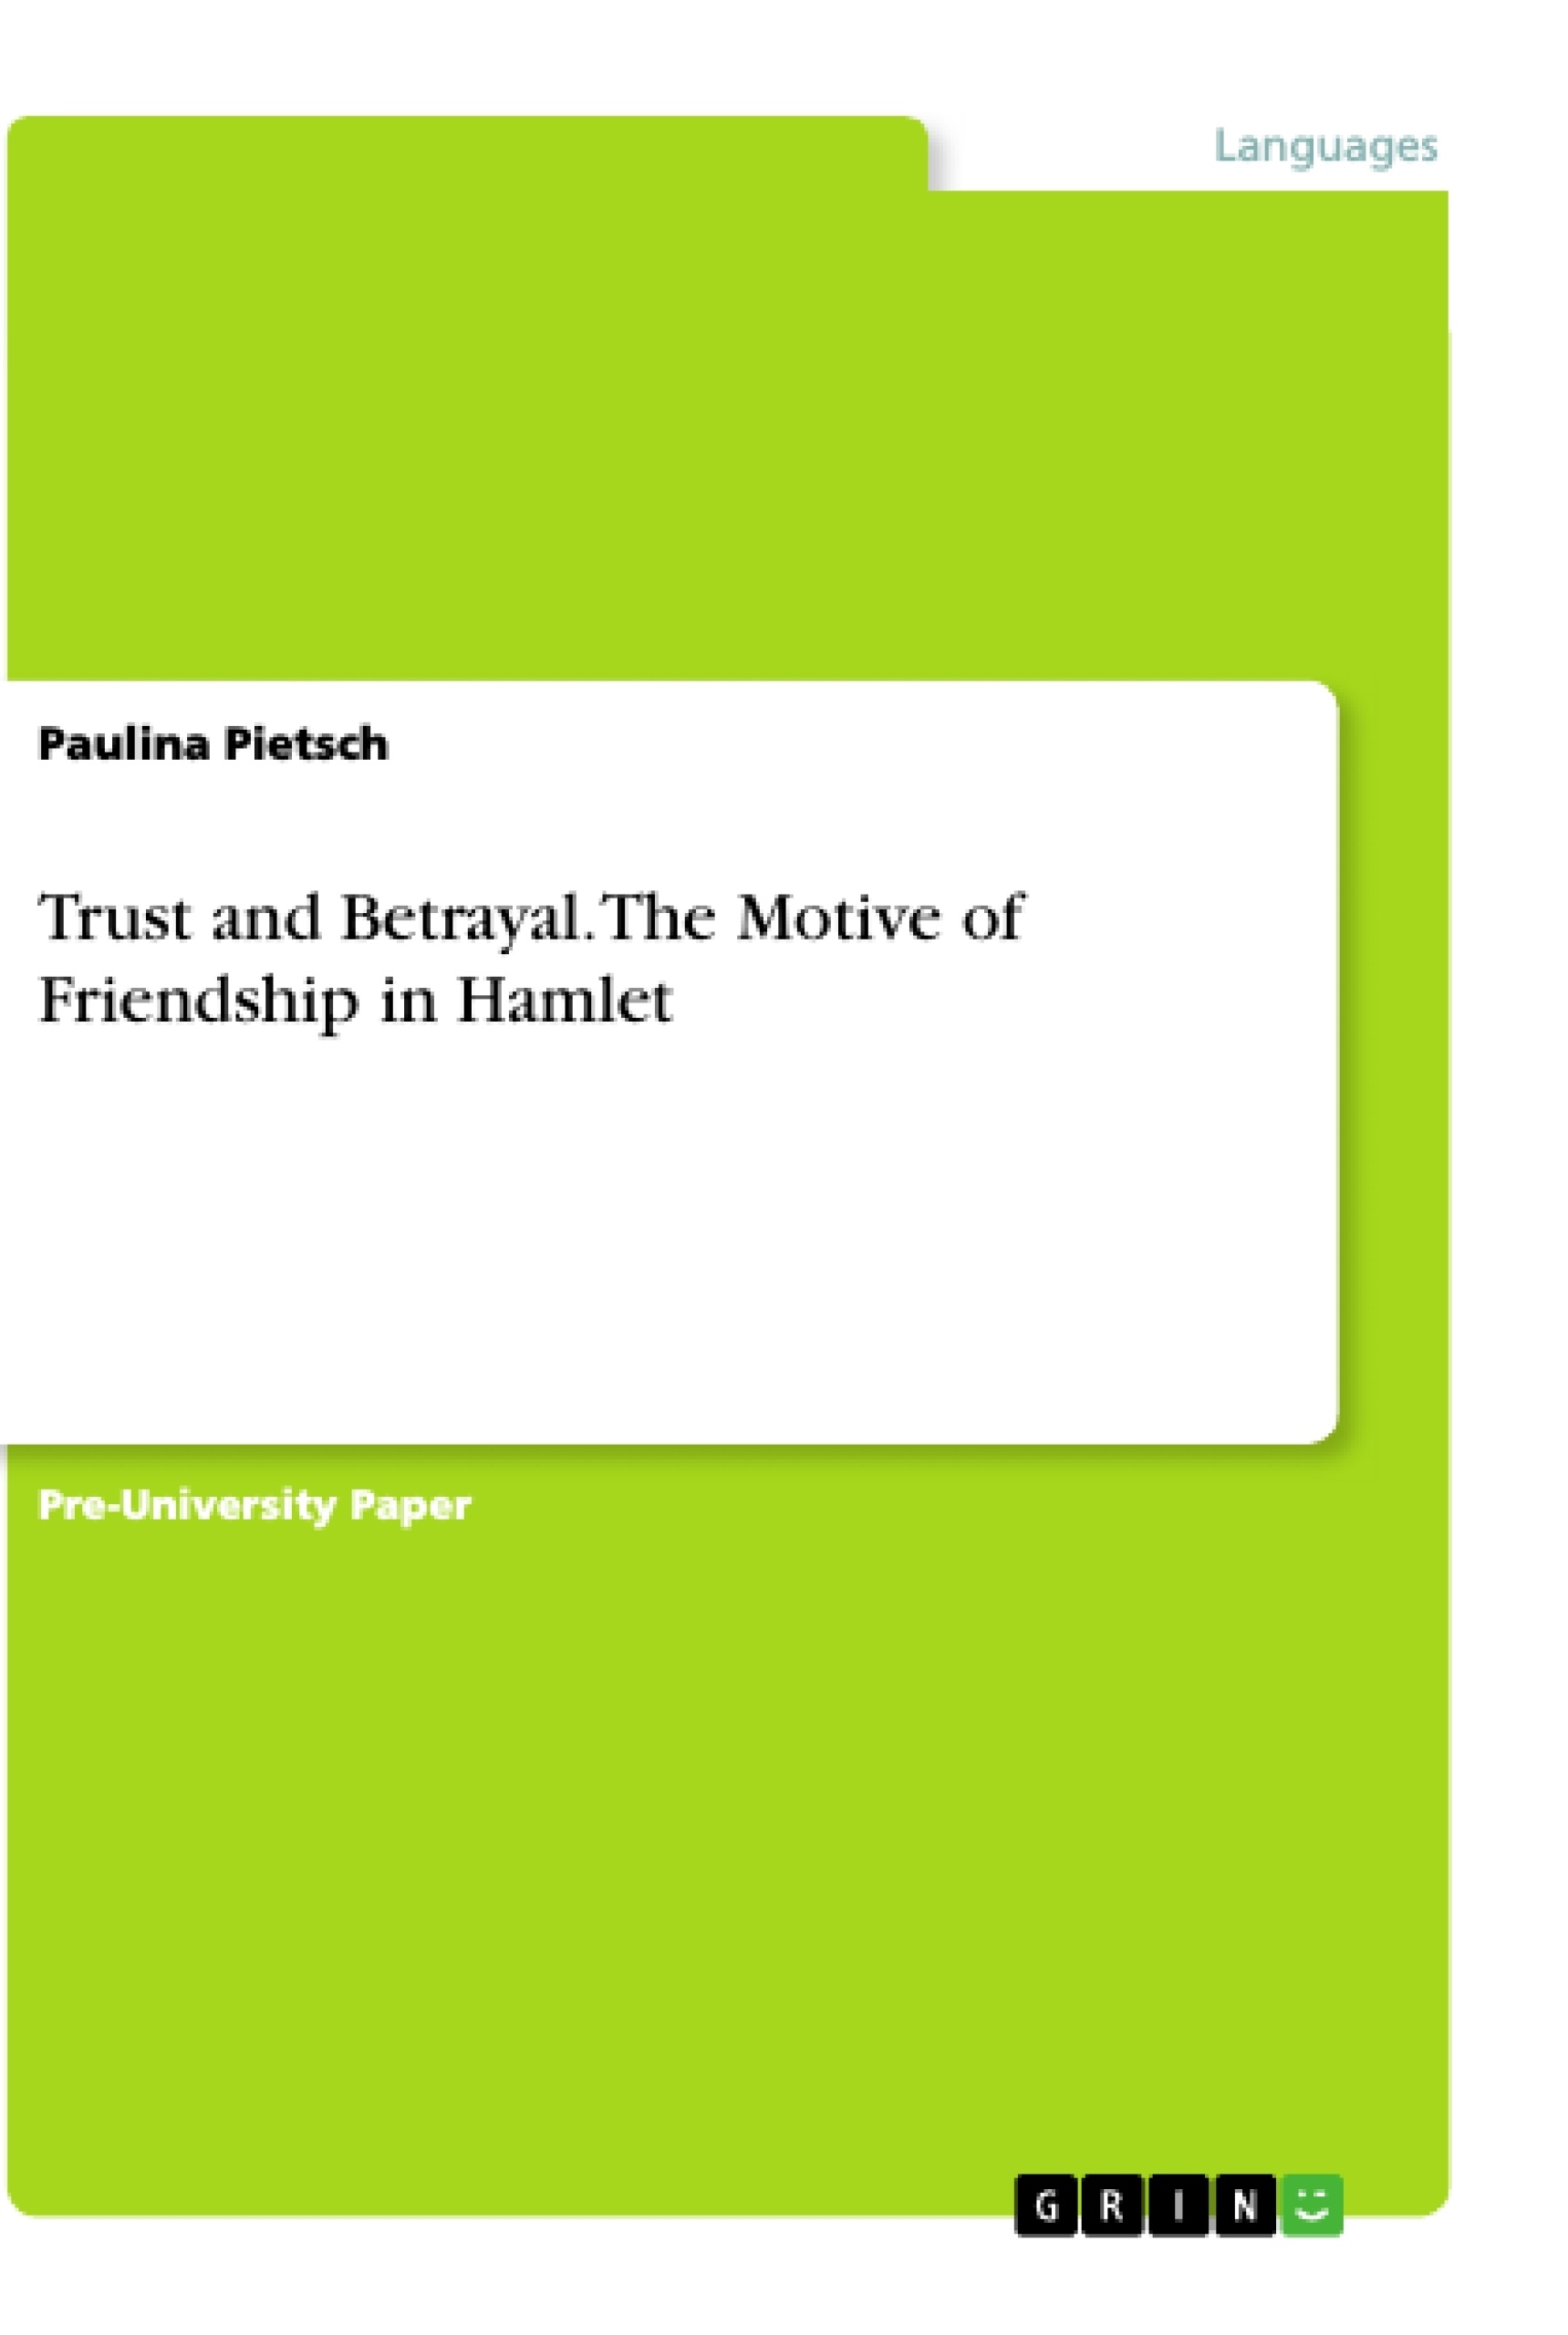 Titre: Trust and Betrayal. The Motive of Friendship in Hamlet